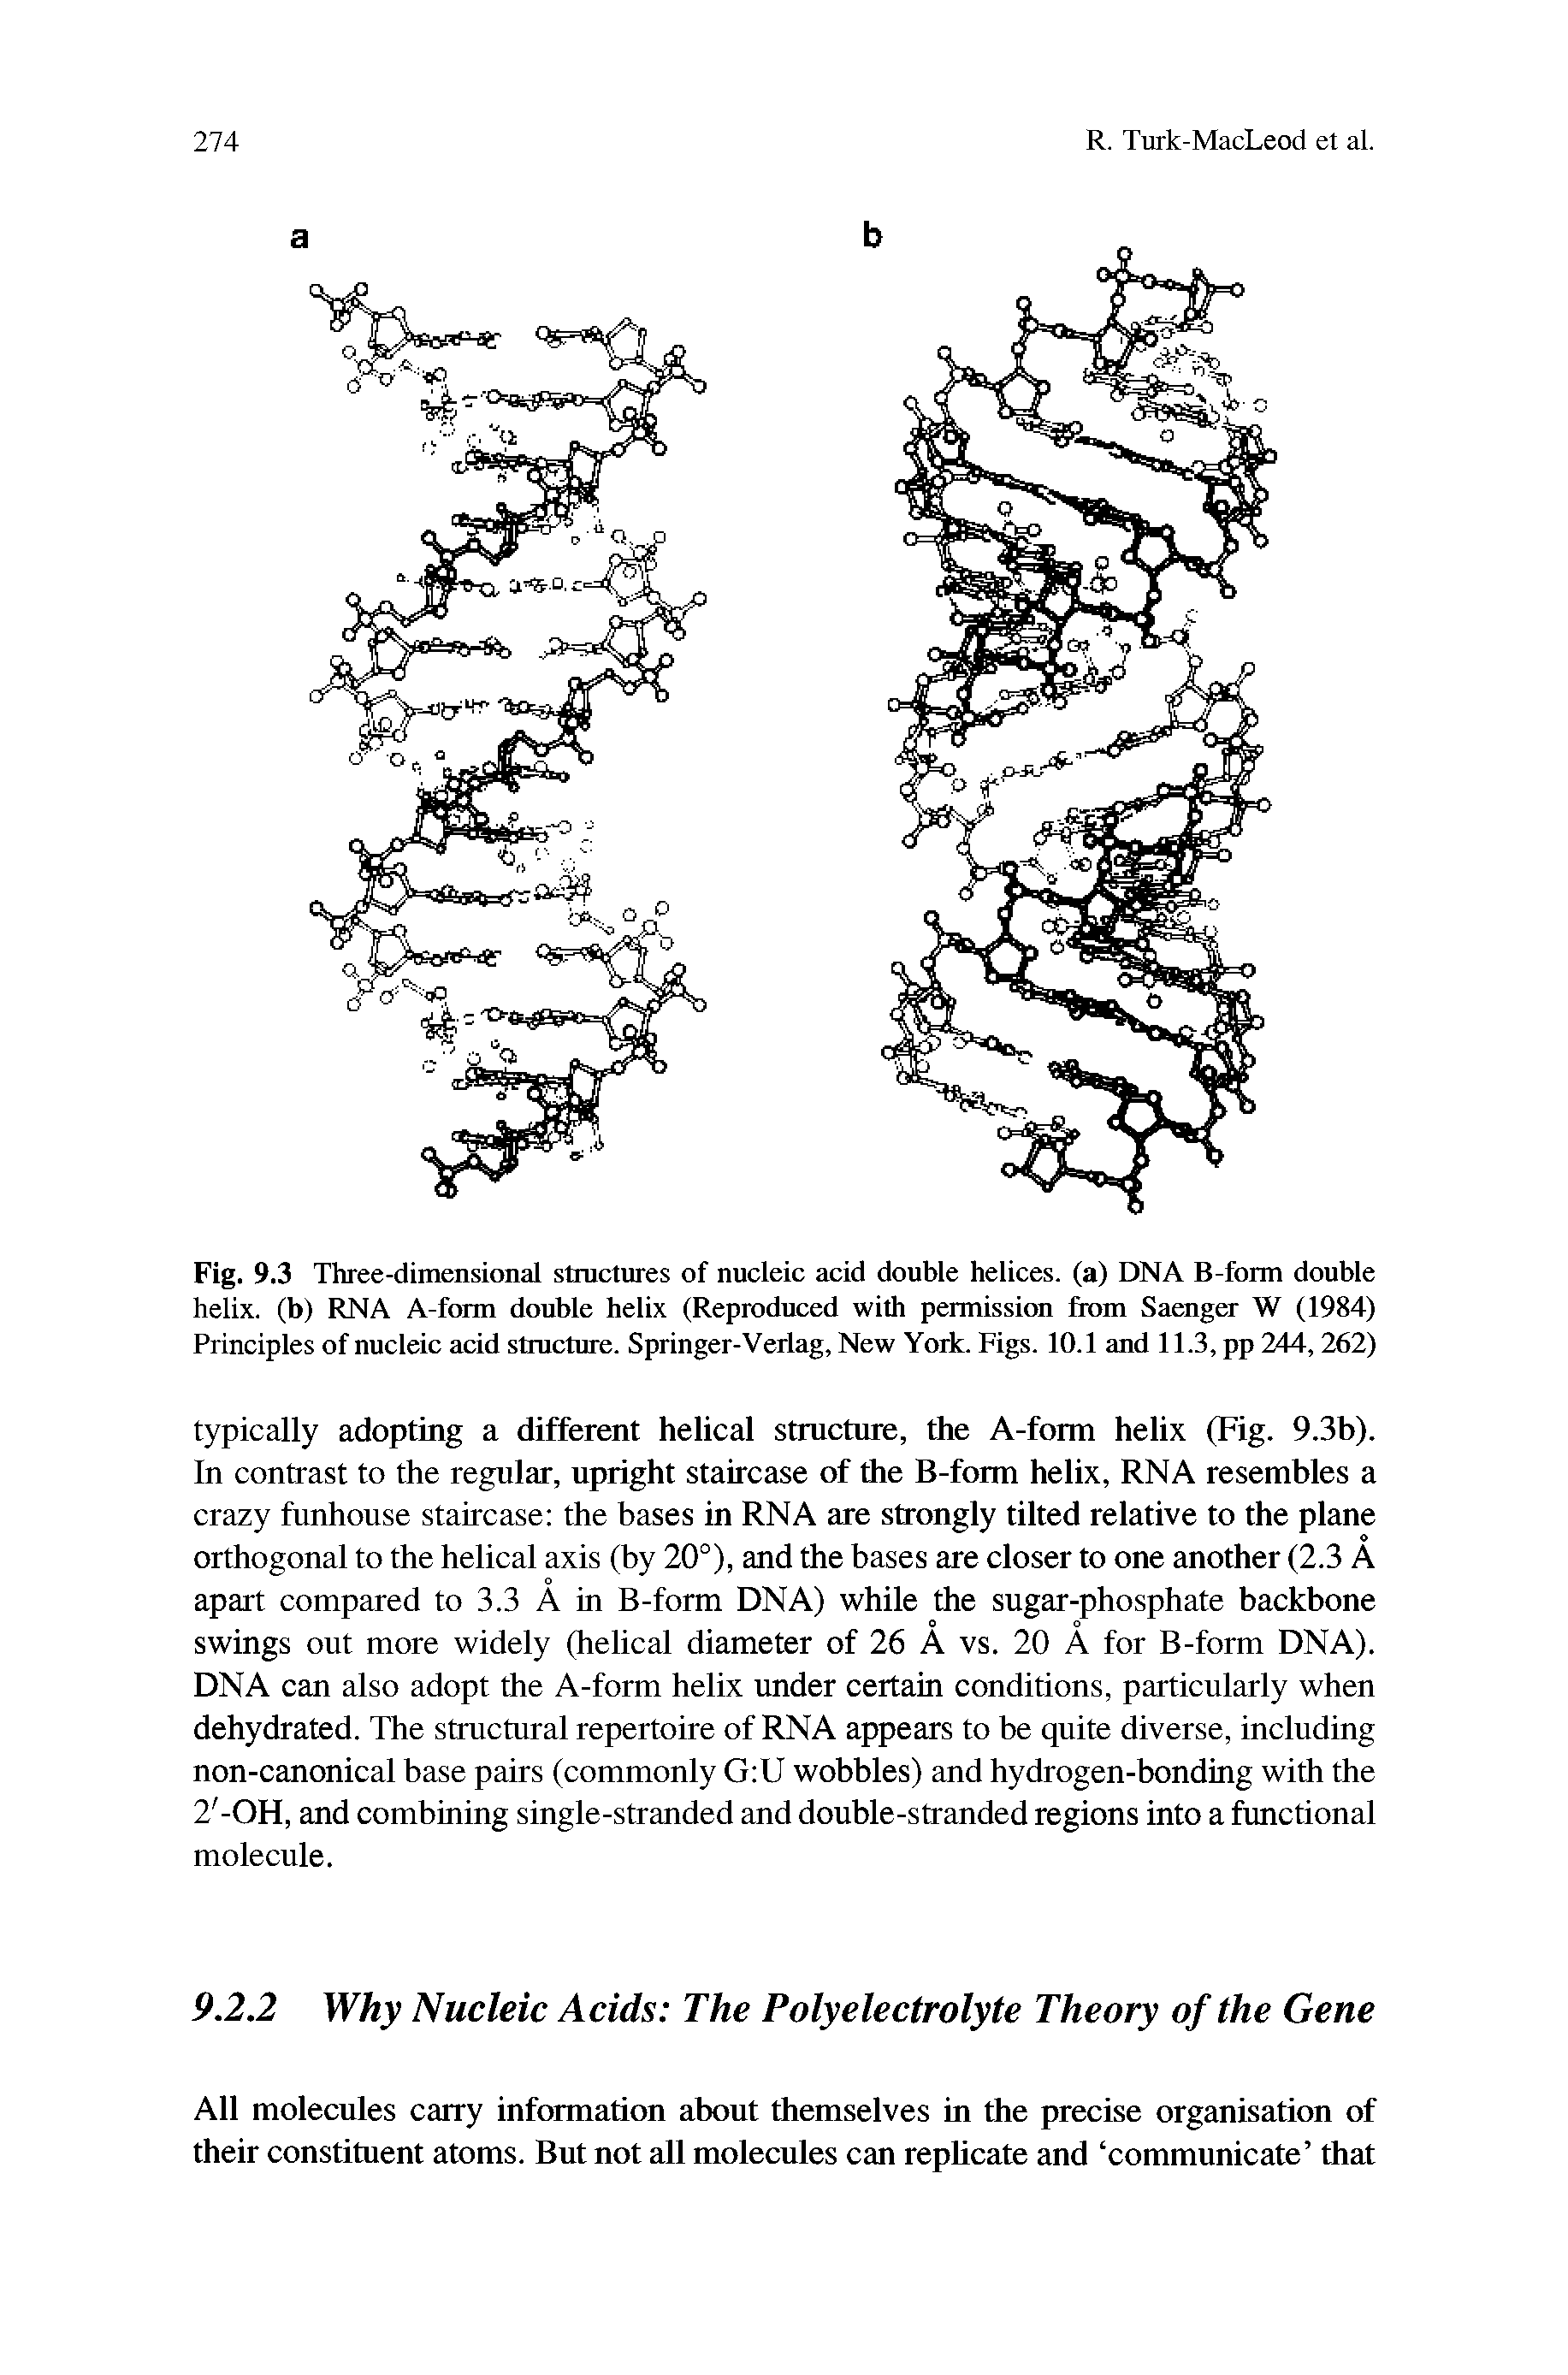 Fig. 9.3 Three-dimensional structures of nucleic acid double helices, (a) DNA B-form double helix, (b) RNA A-fram double helix (Reproduced with permissitm fiom Saenger W (1984) Principles of nucleic add structure. Springer-Verlag, New York. Figs. 10.1 and 11.3, pp 244,262)...